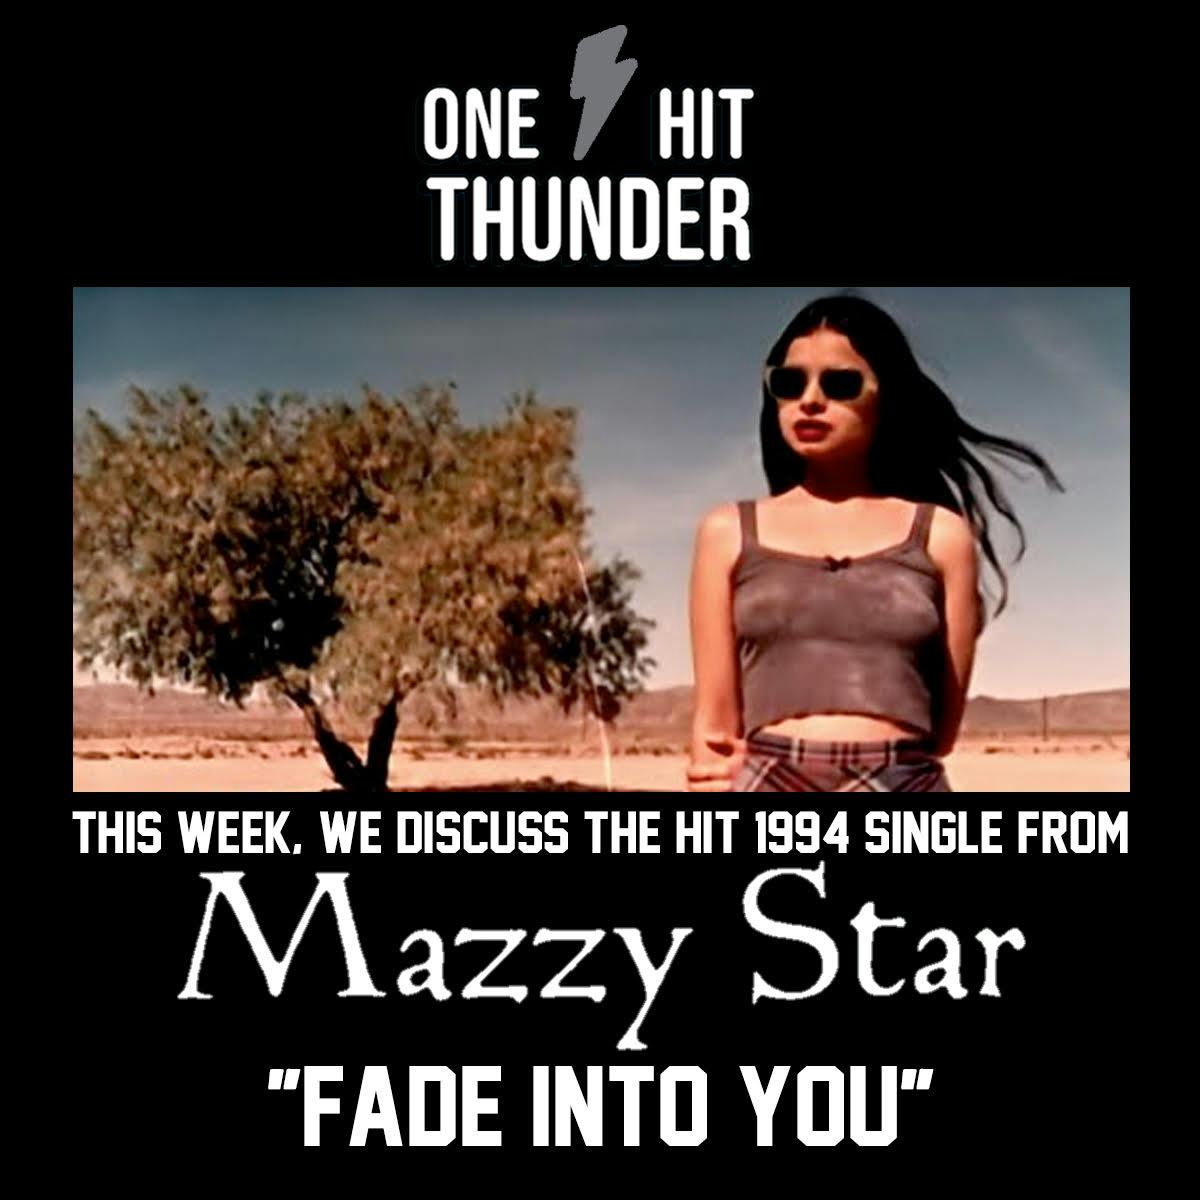 ”Fade Into You” by Mazzy Star